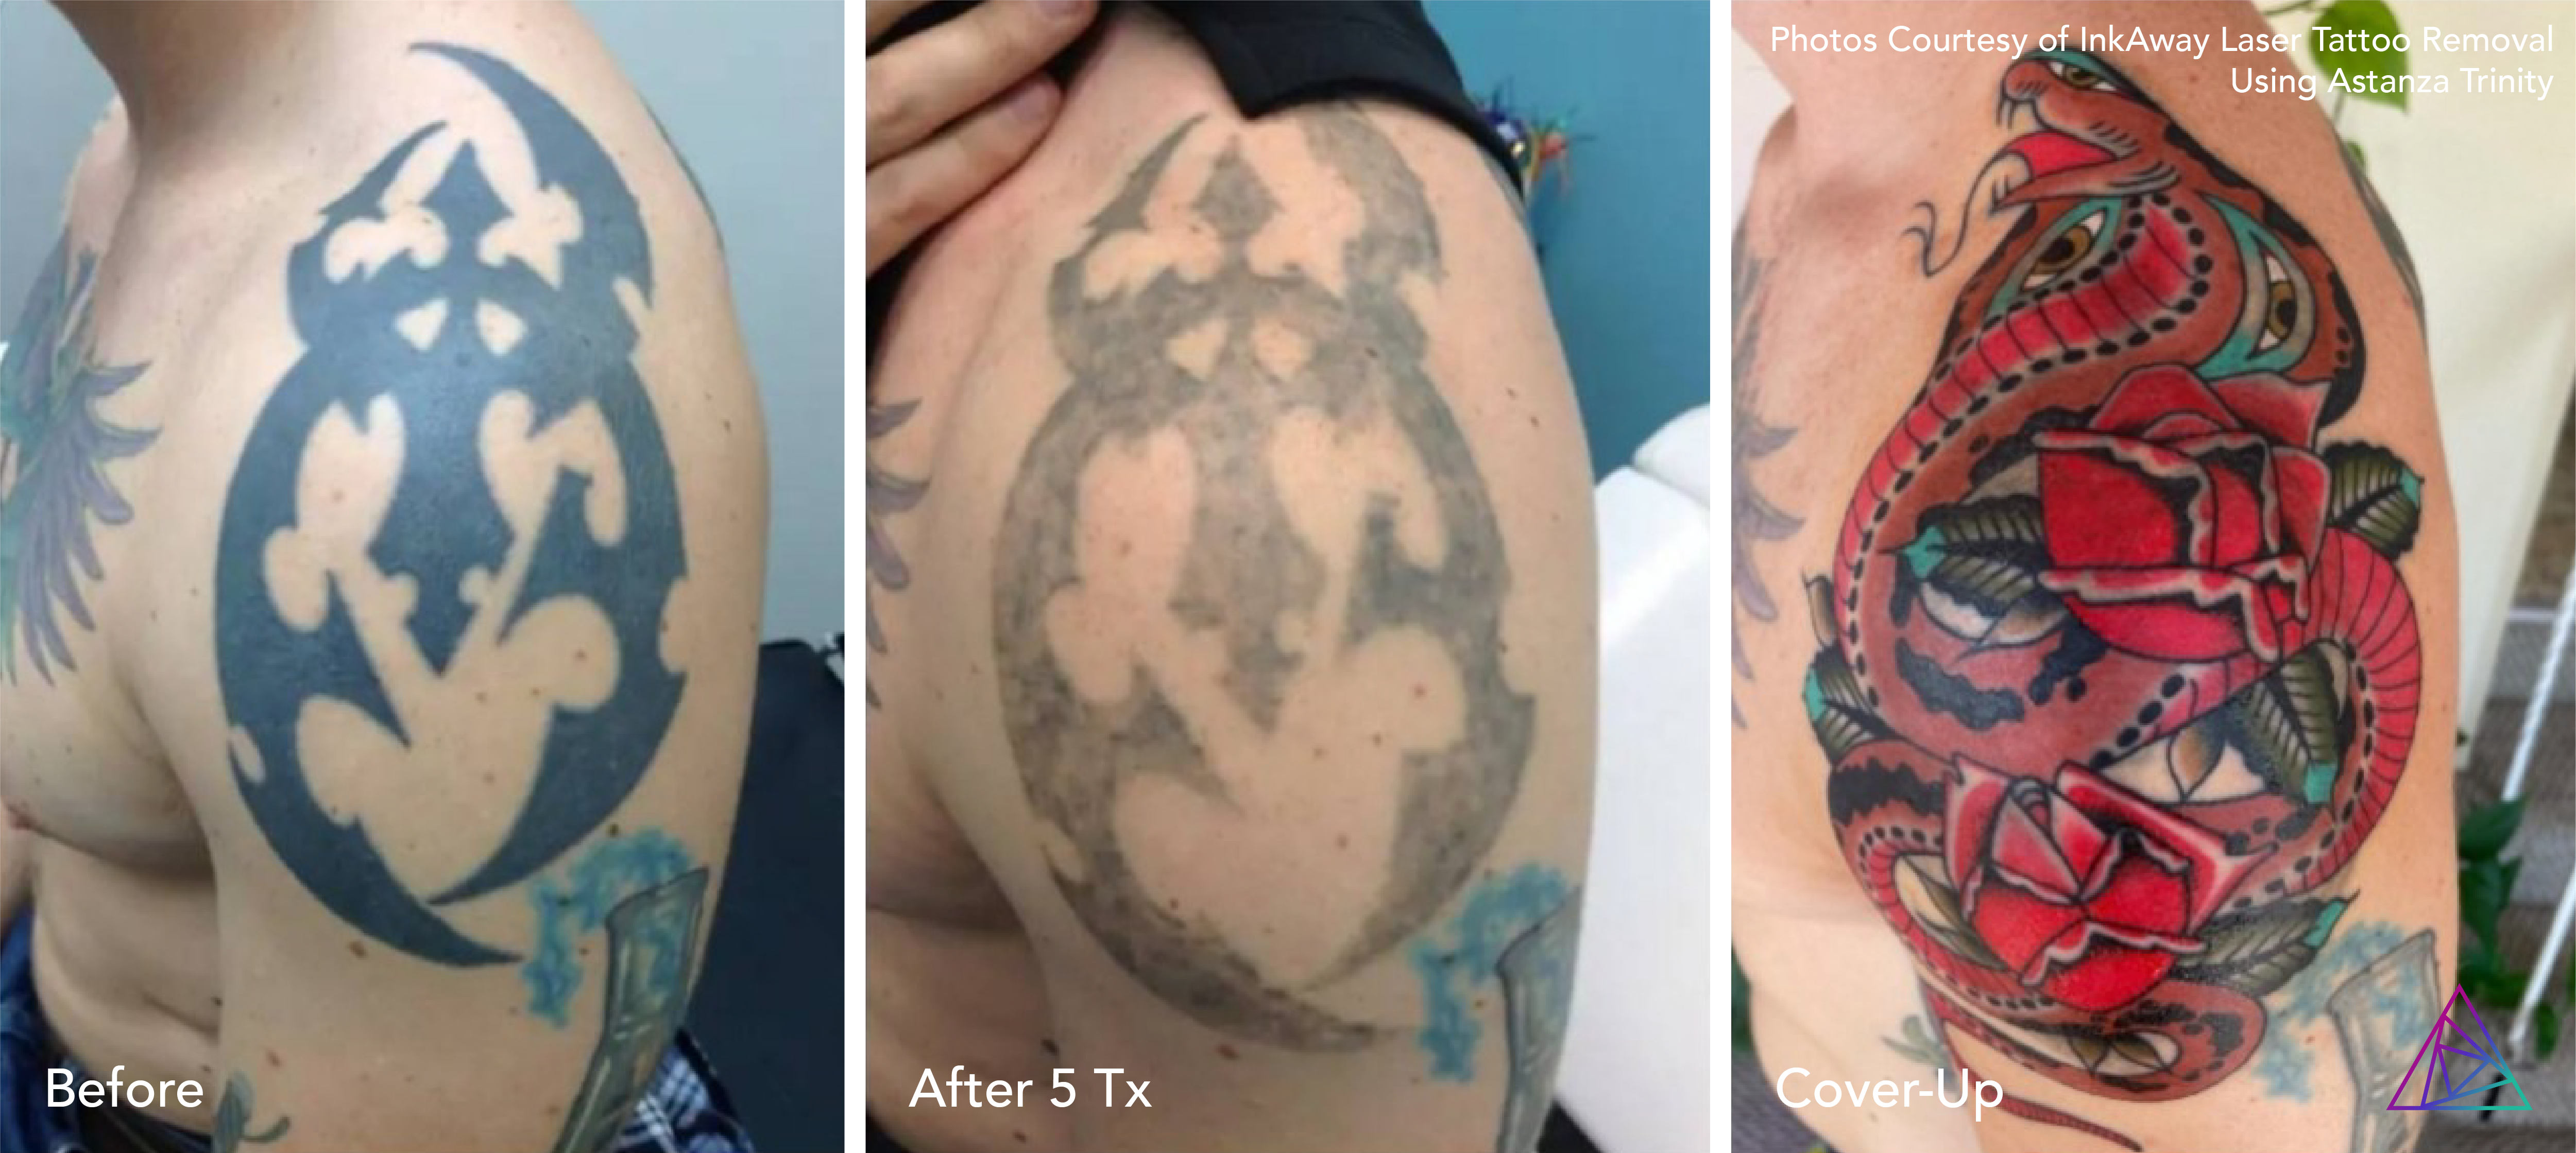 Laser Tattoo Removal Specialists In Cape Coral FL  The Skin Spot Laser  Club Cape Corals Top Rated Med Spa